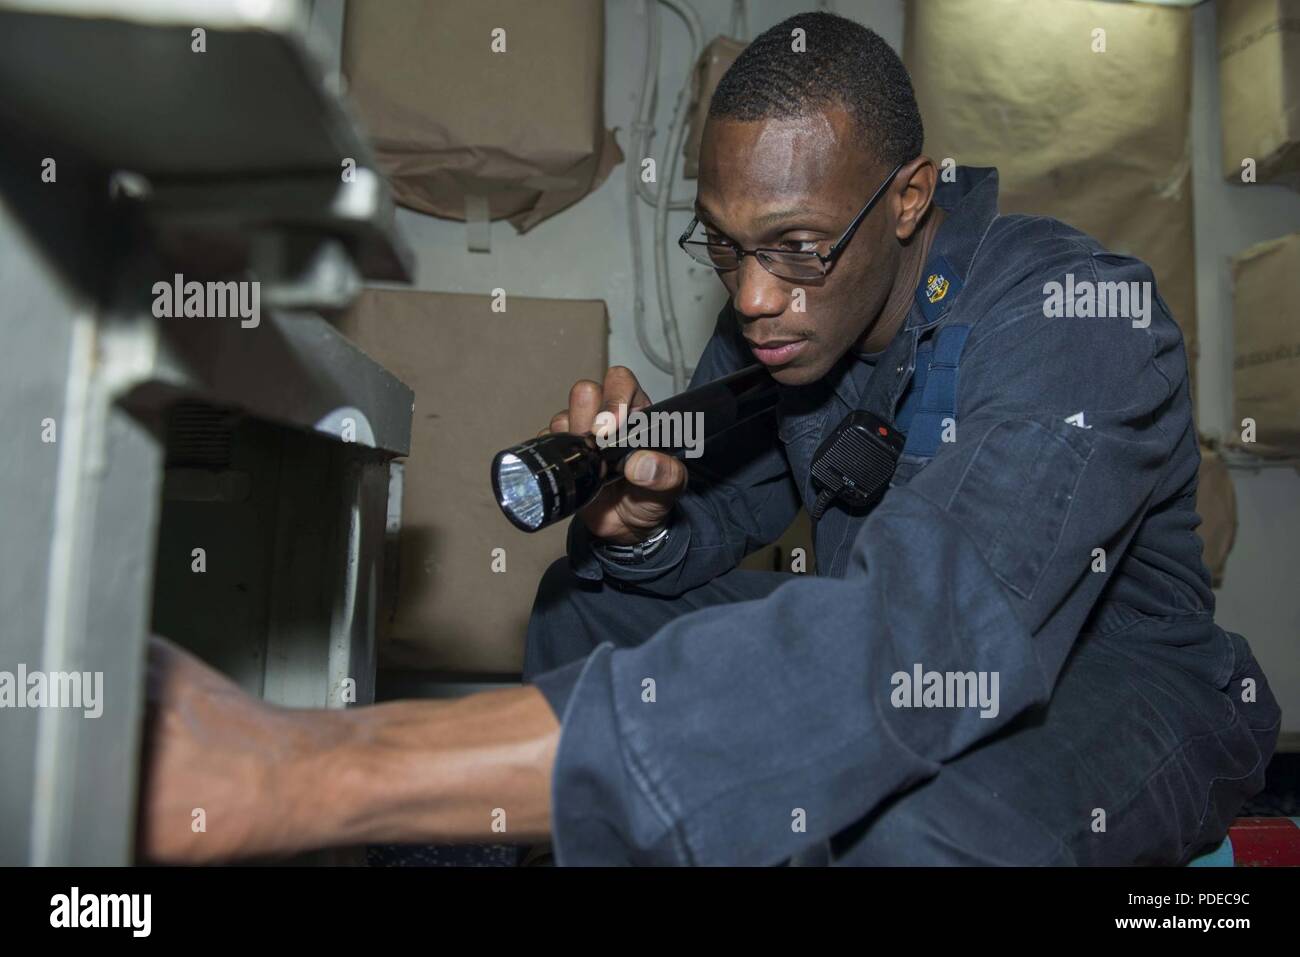 MEDITERRANEAN SEA (May 19, 2018) Chief Damage Controlman Damarcus McCoy inspects an Aqueous Film Forming Foam (AFFF) station aboard the Nimitz-class aircraft carrier USS Harry S. Truman (CVN 75). As the Carrier Strike Group 8 flag ship, Truman's support of Operation Inherent Resolve demonstrates the capability and flexibility of U.S. Naval Forces, and its resolve to eliminate the terrorist group ISIS and the threat it poses. Stock Photo